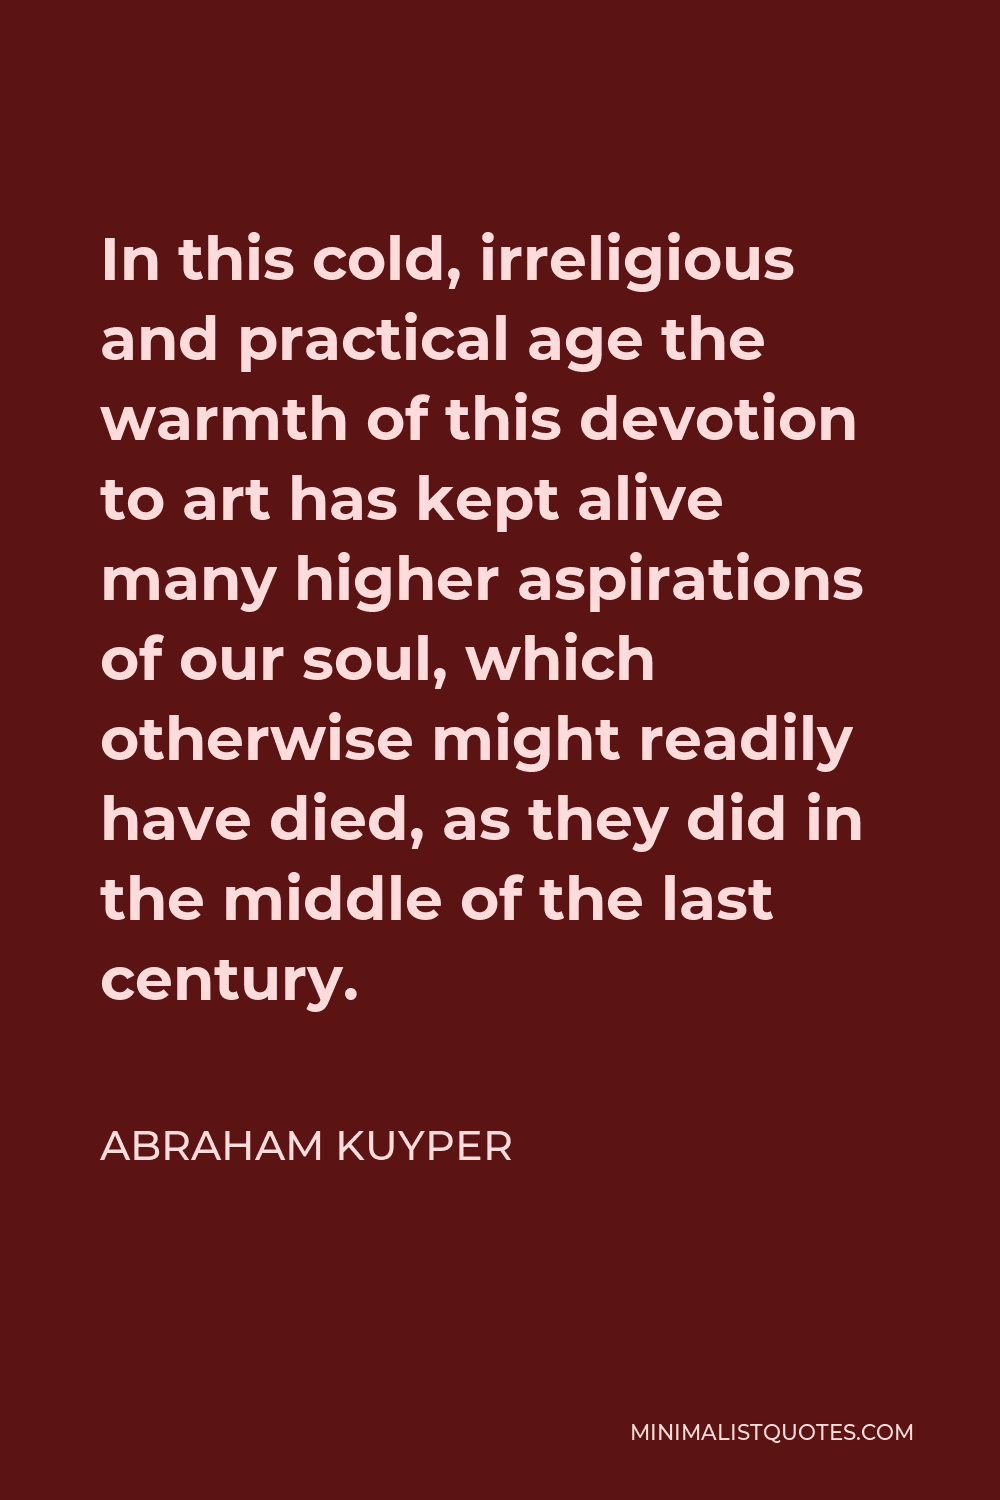 Abraham Kuyper Quote - In this cold, irreligious and practical age the warmth of this devotion to art has kept alive many higher aspirations of our soul, which otherwise might readily have died, as they did in the middle of the last century.